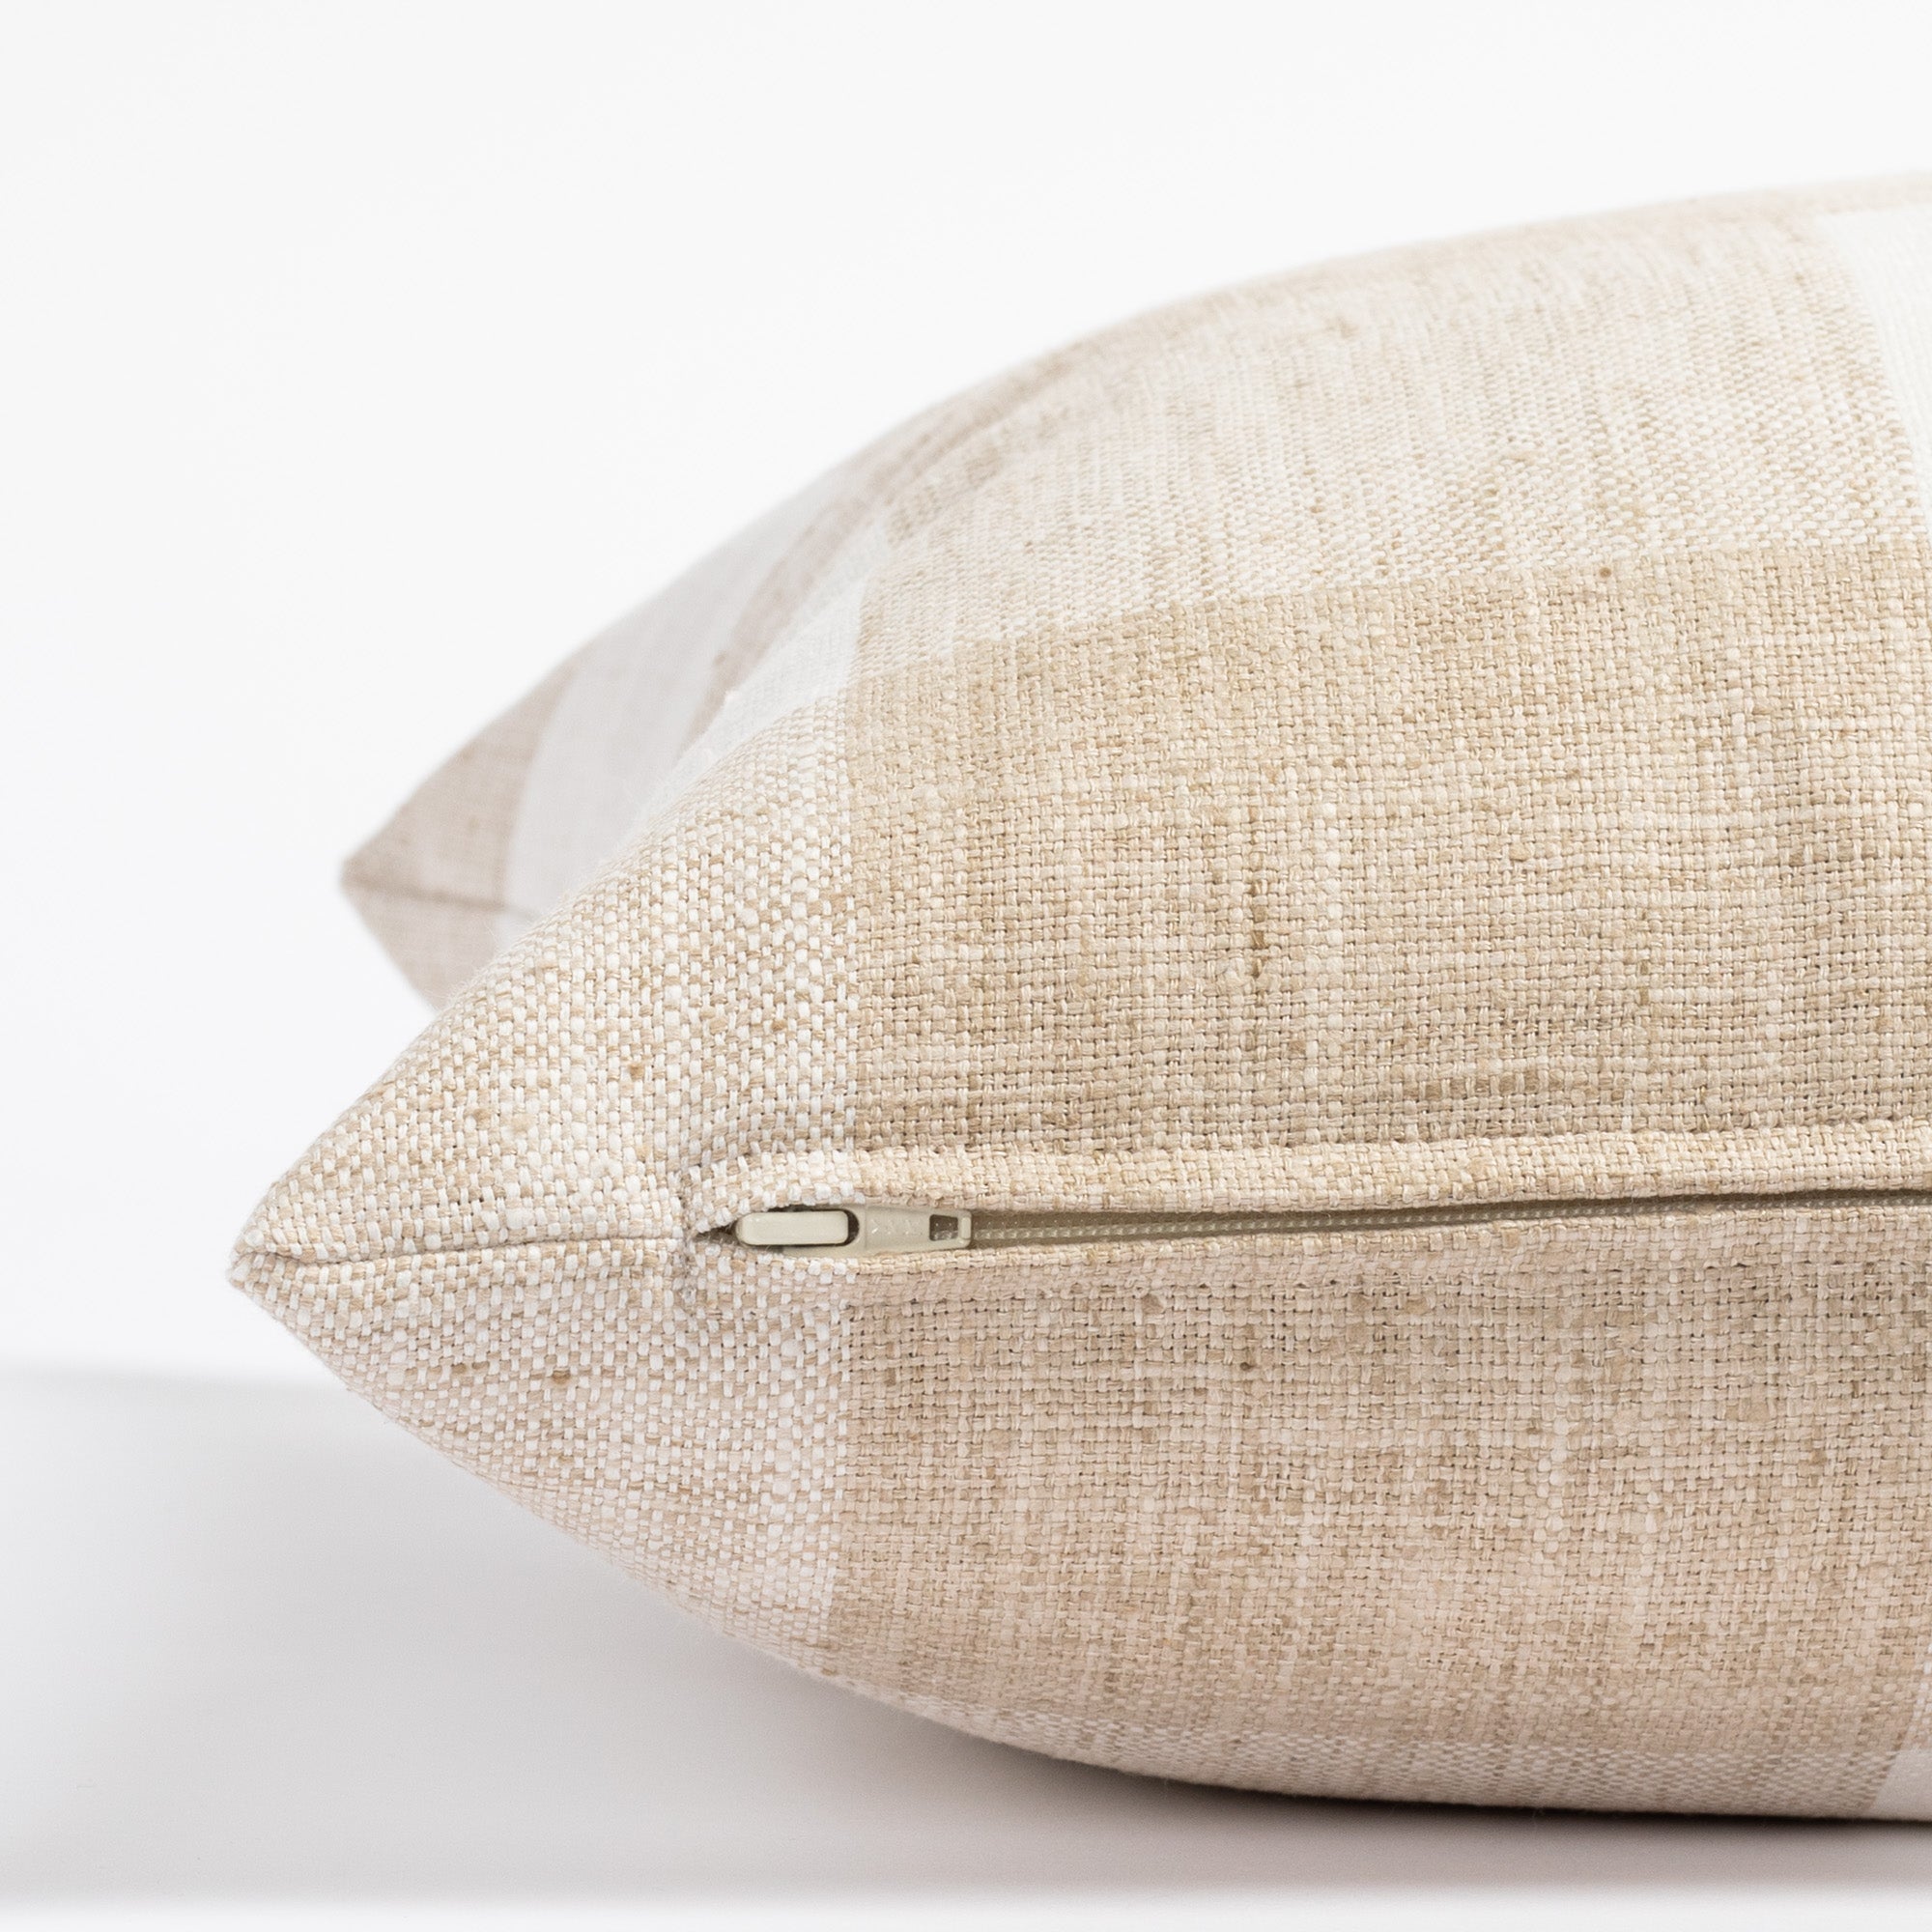 a white and beige check patterned throw pillow : zipper view